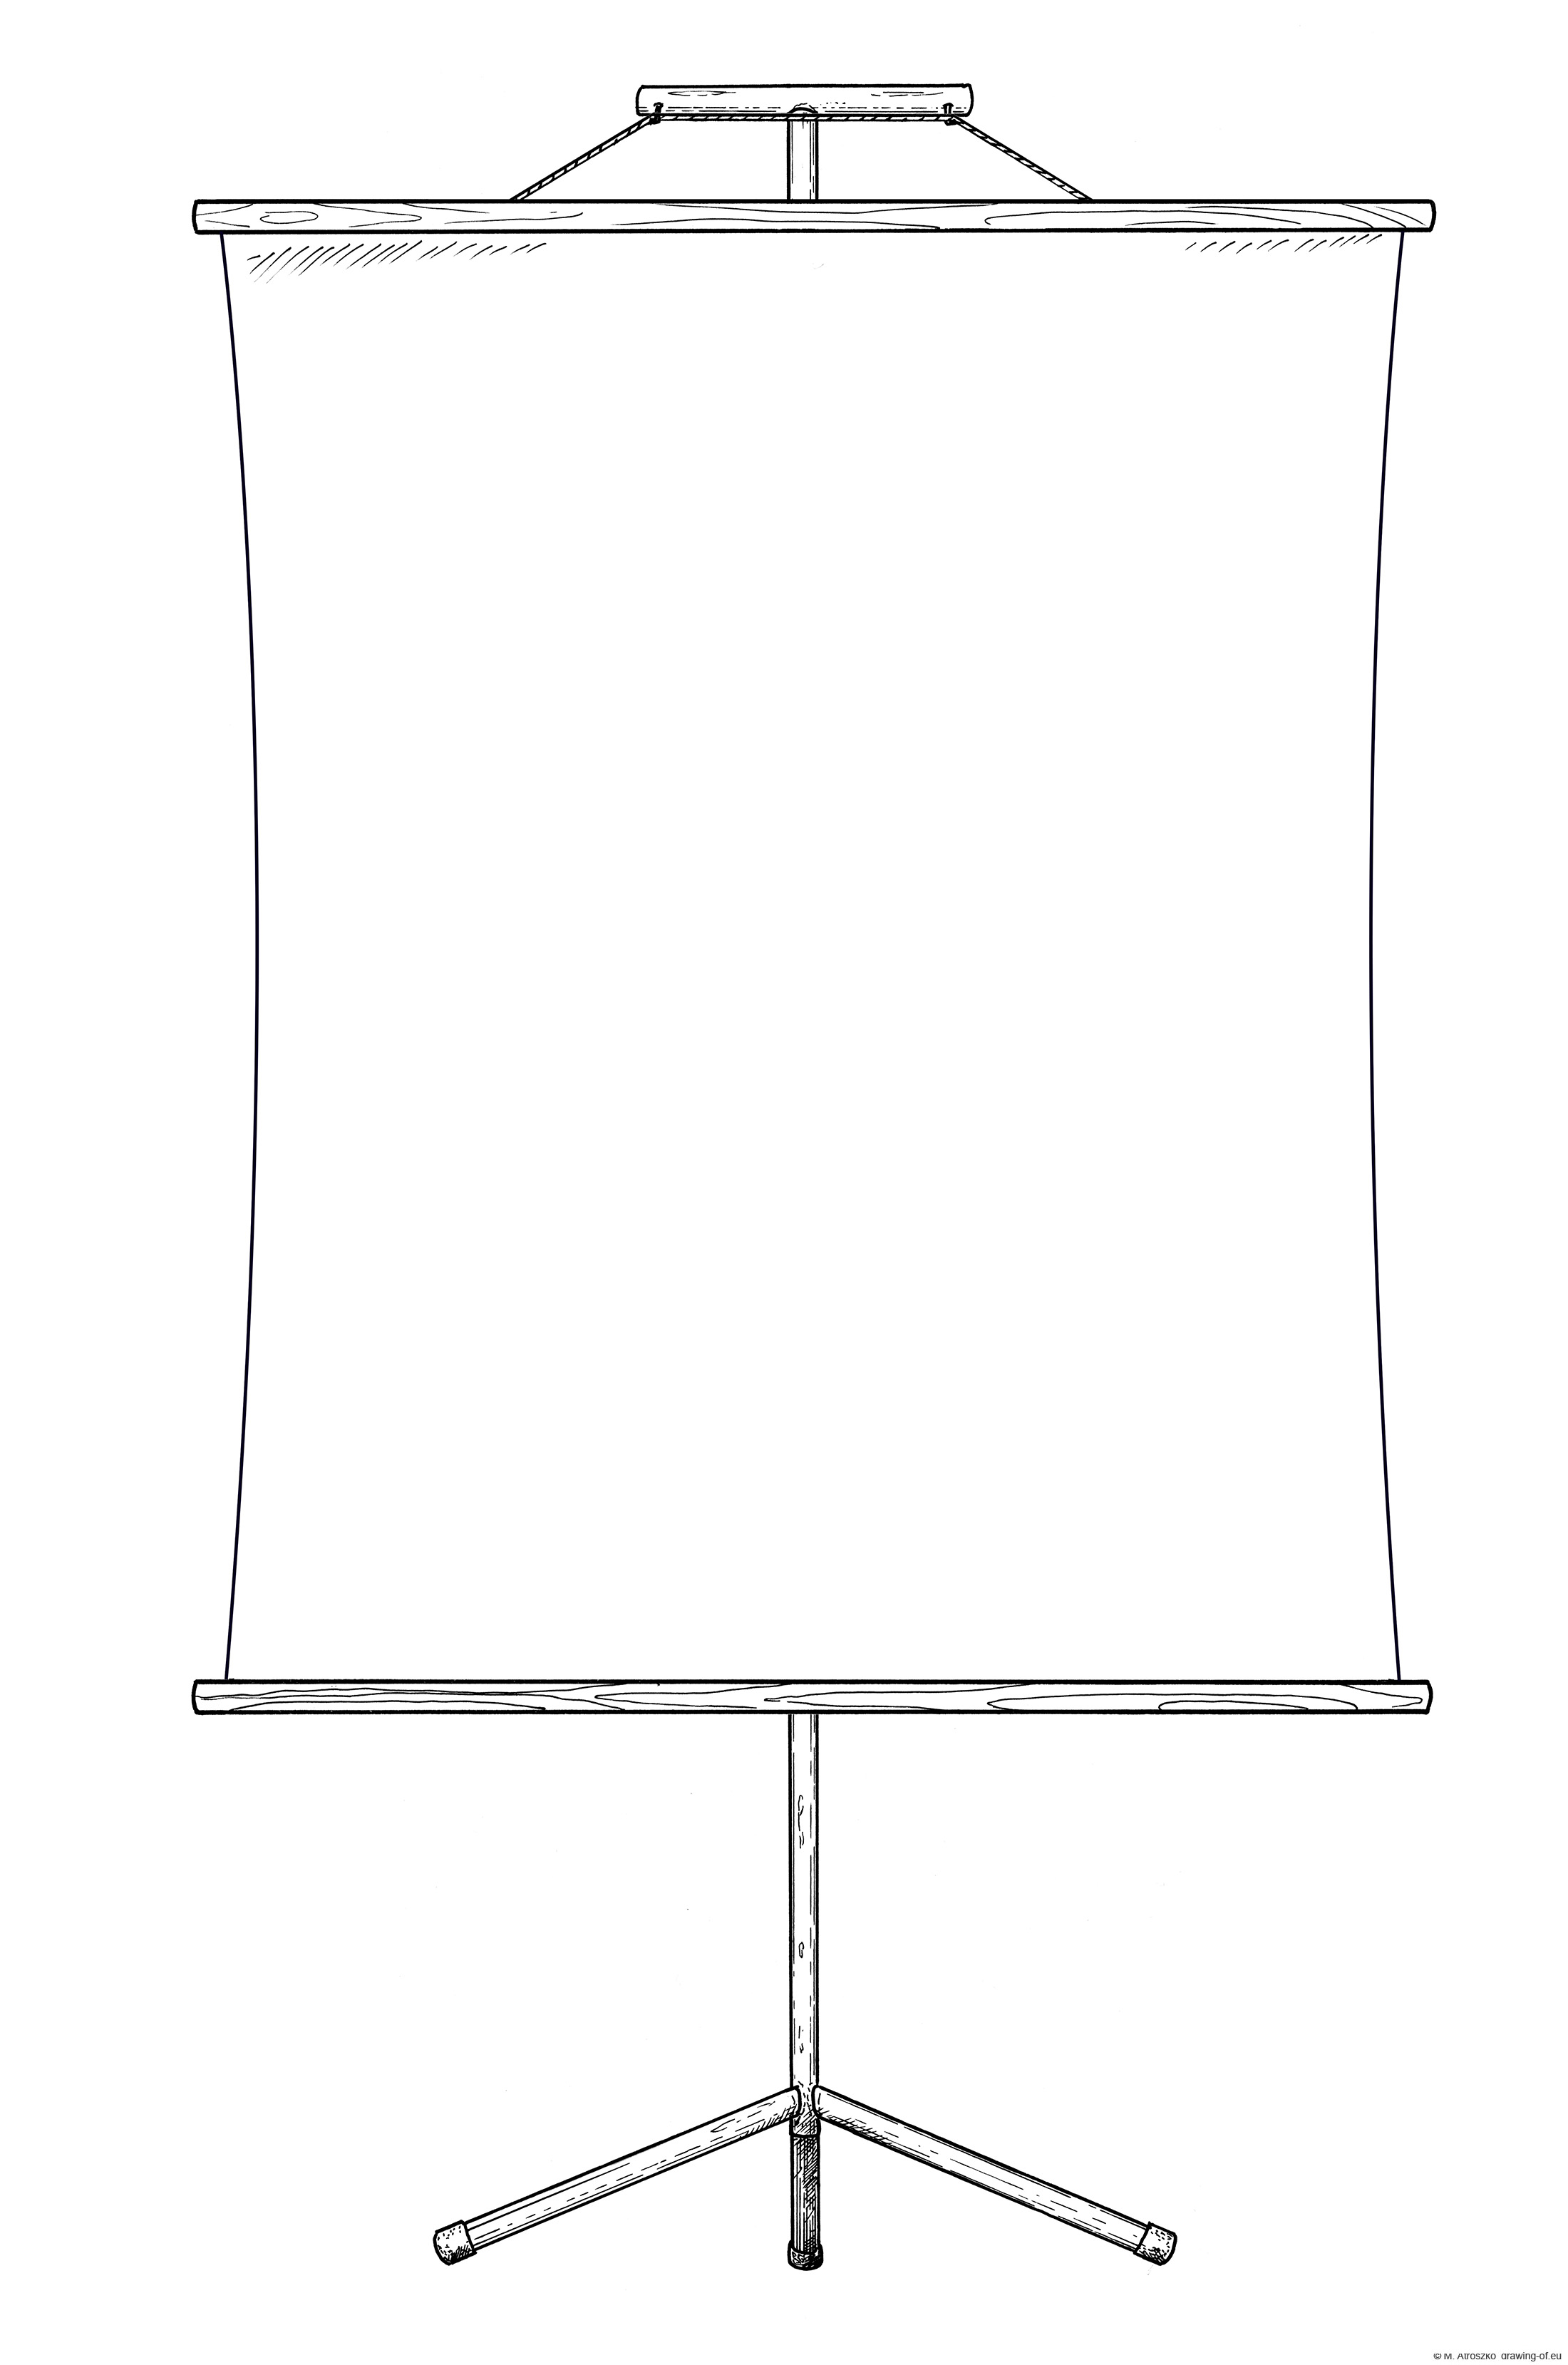 Blank banner - billboard - map on a stand